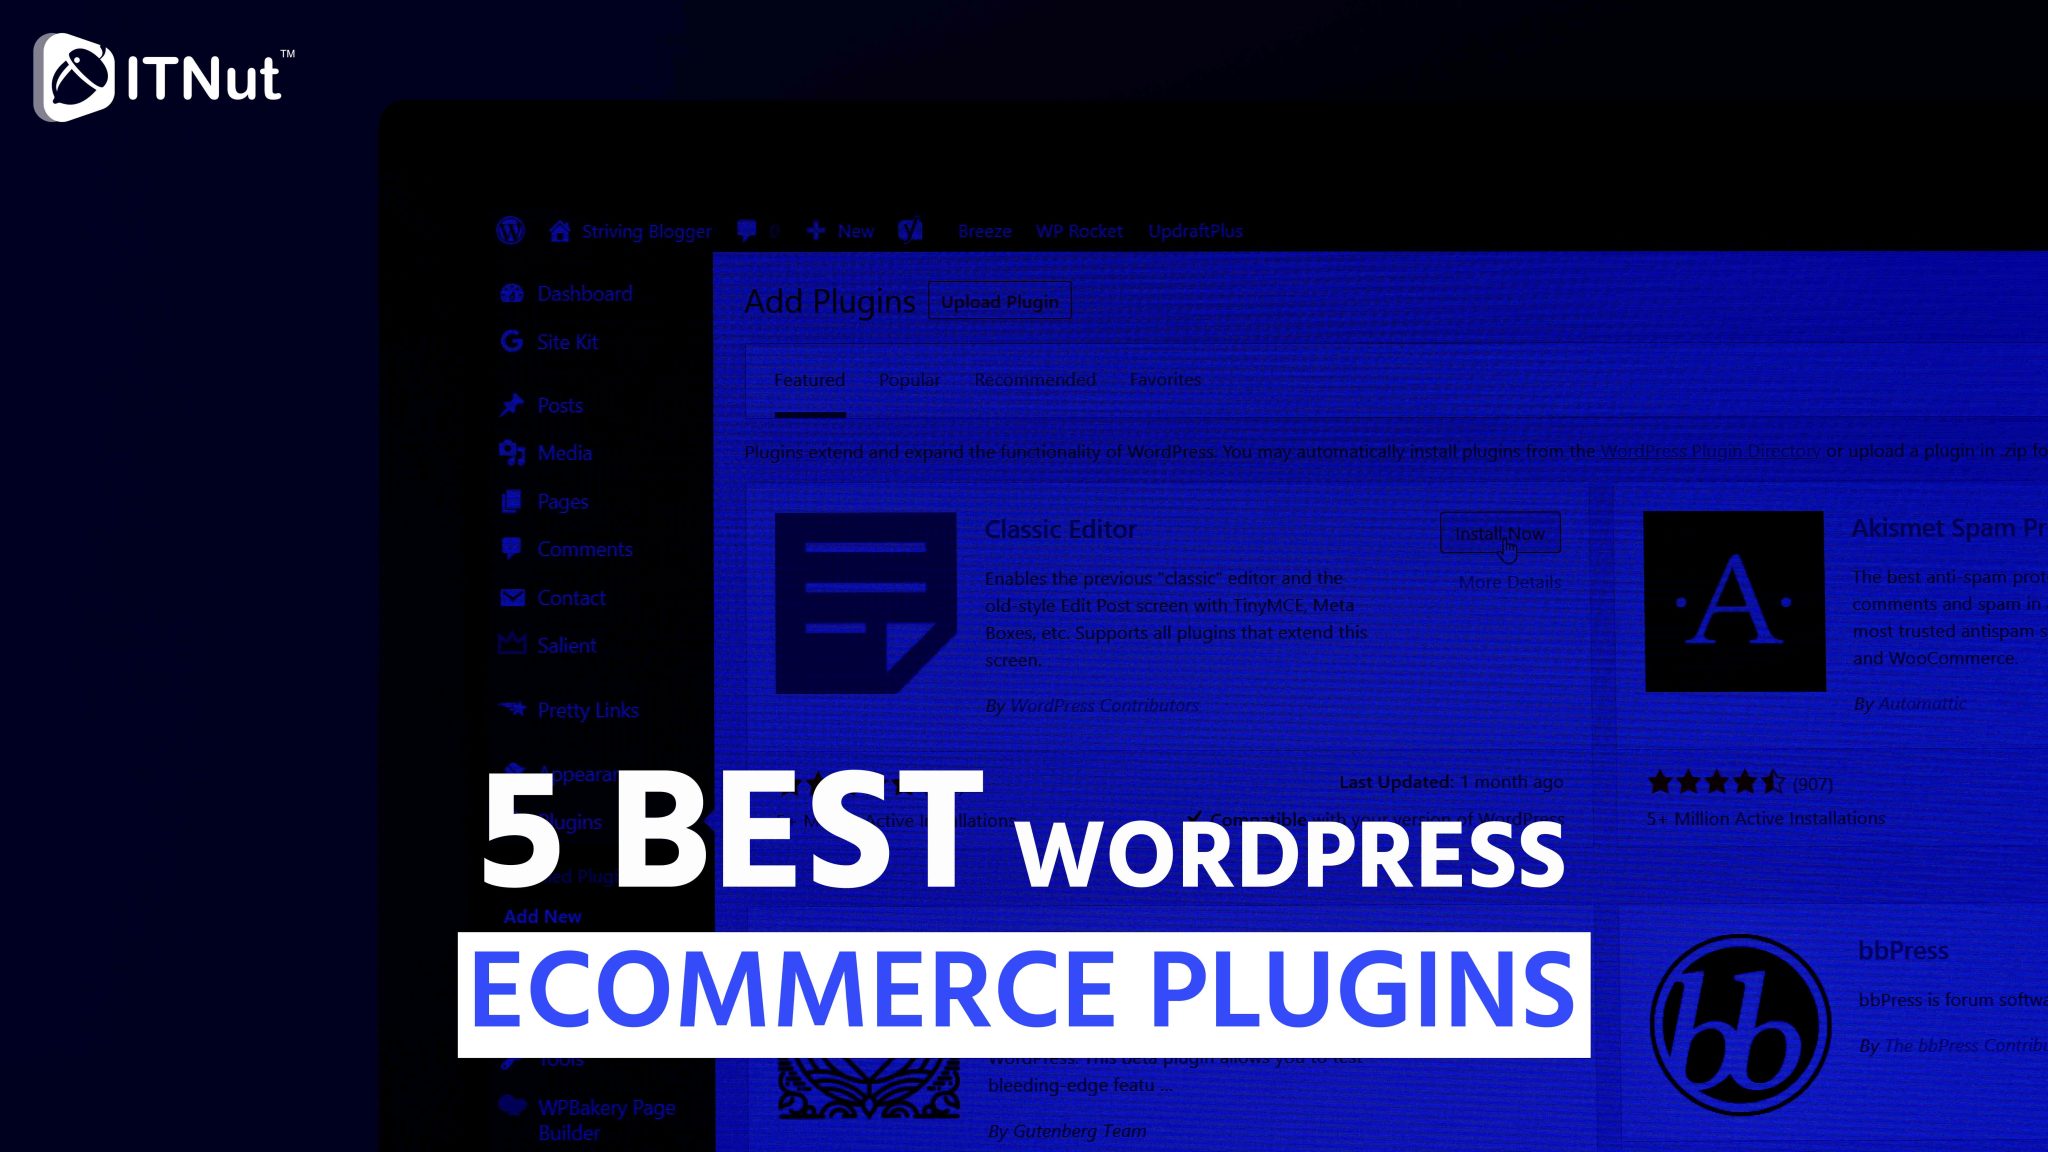 You are currently viewing 5 Best WordPress Ecommerce Plugins